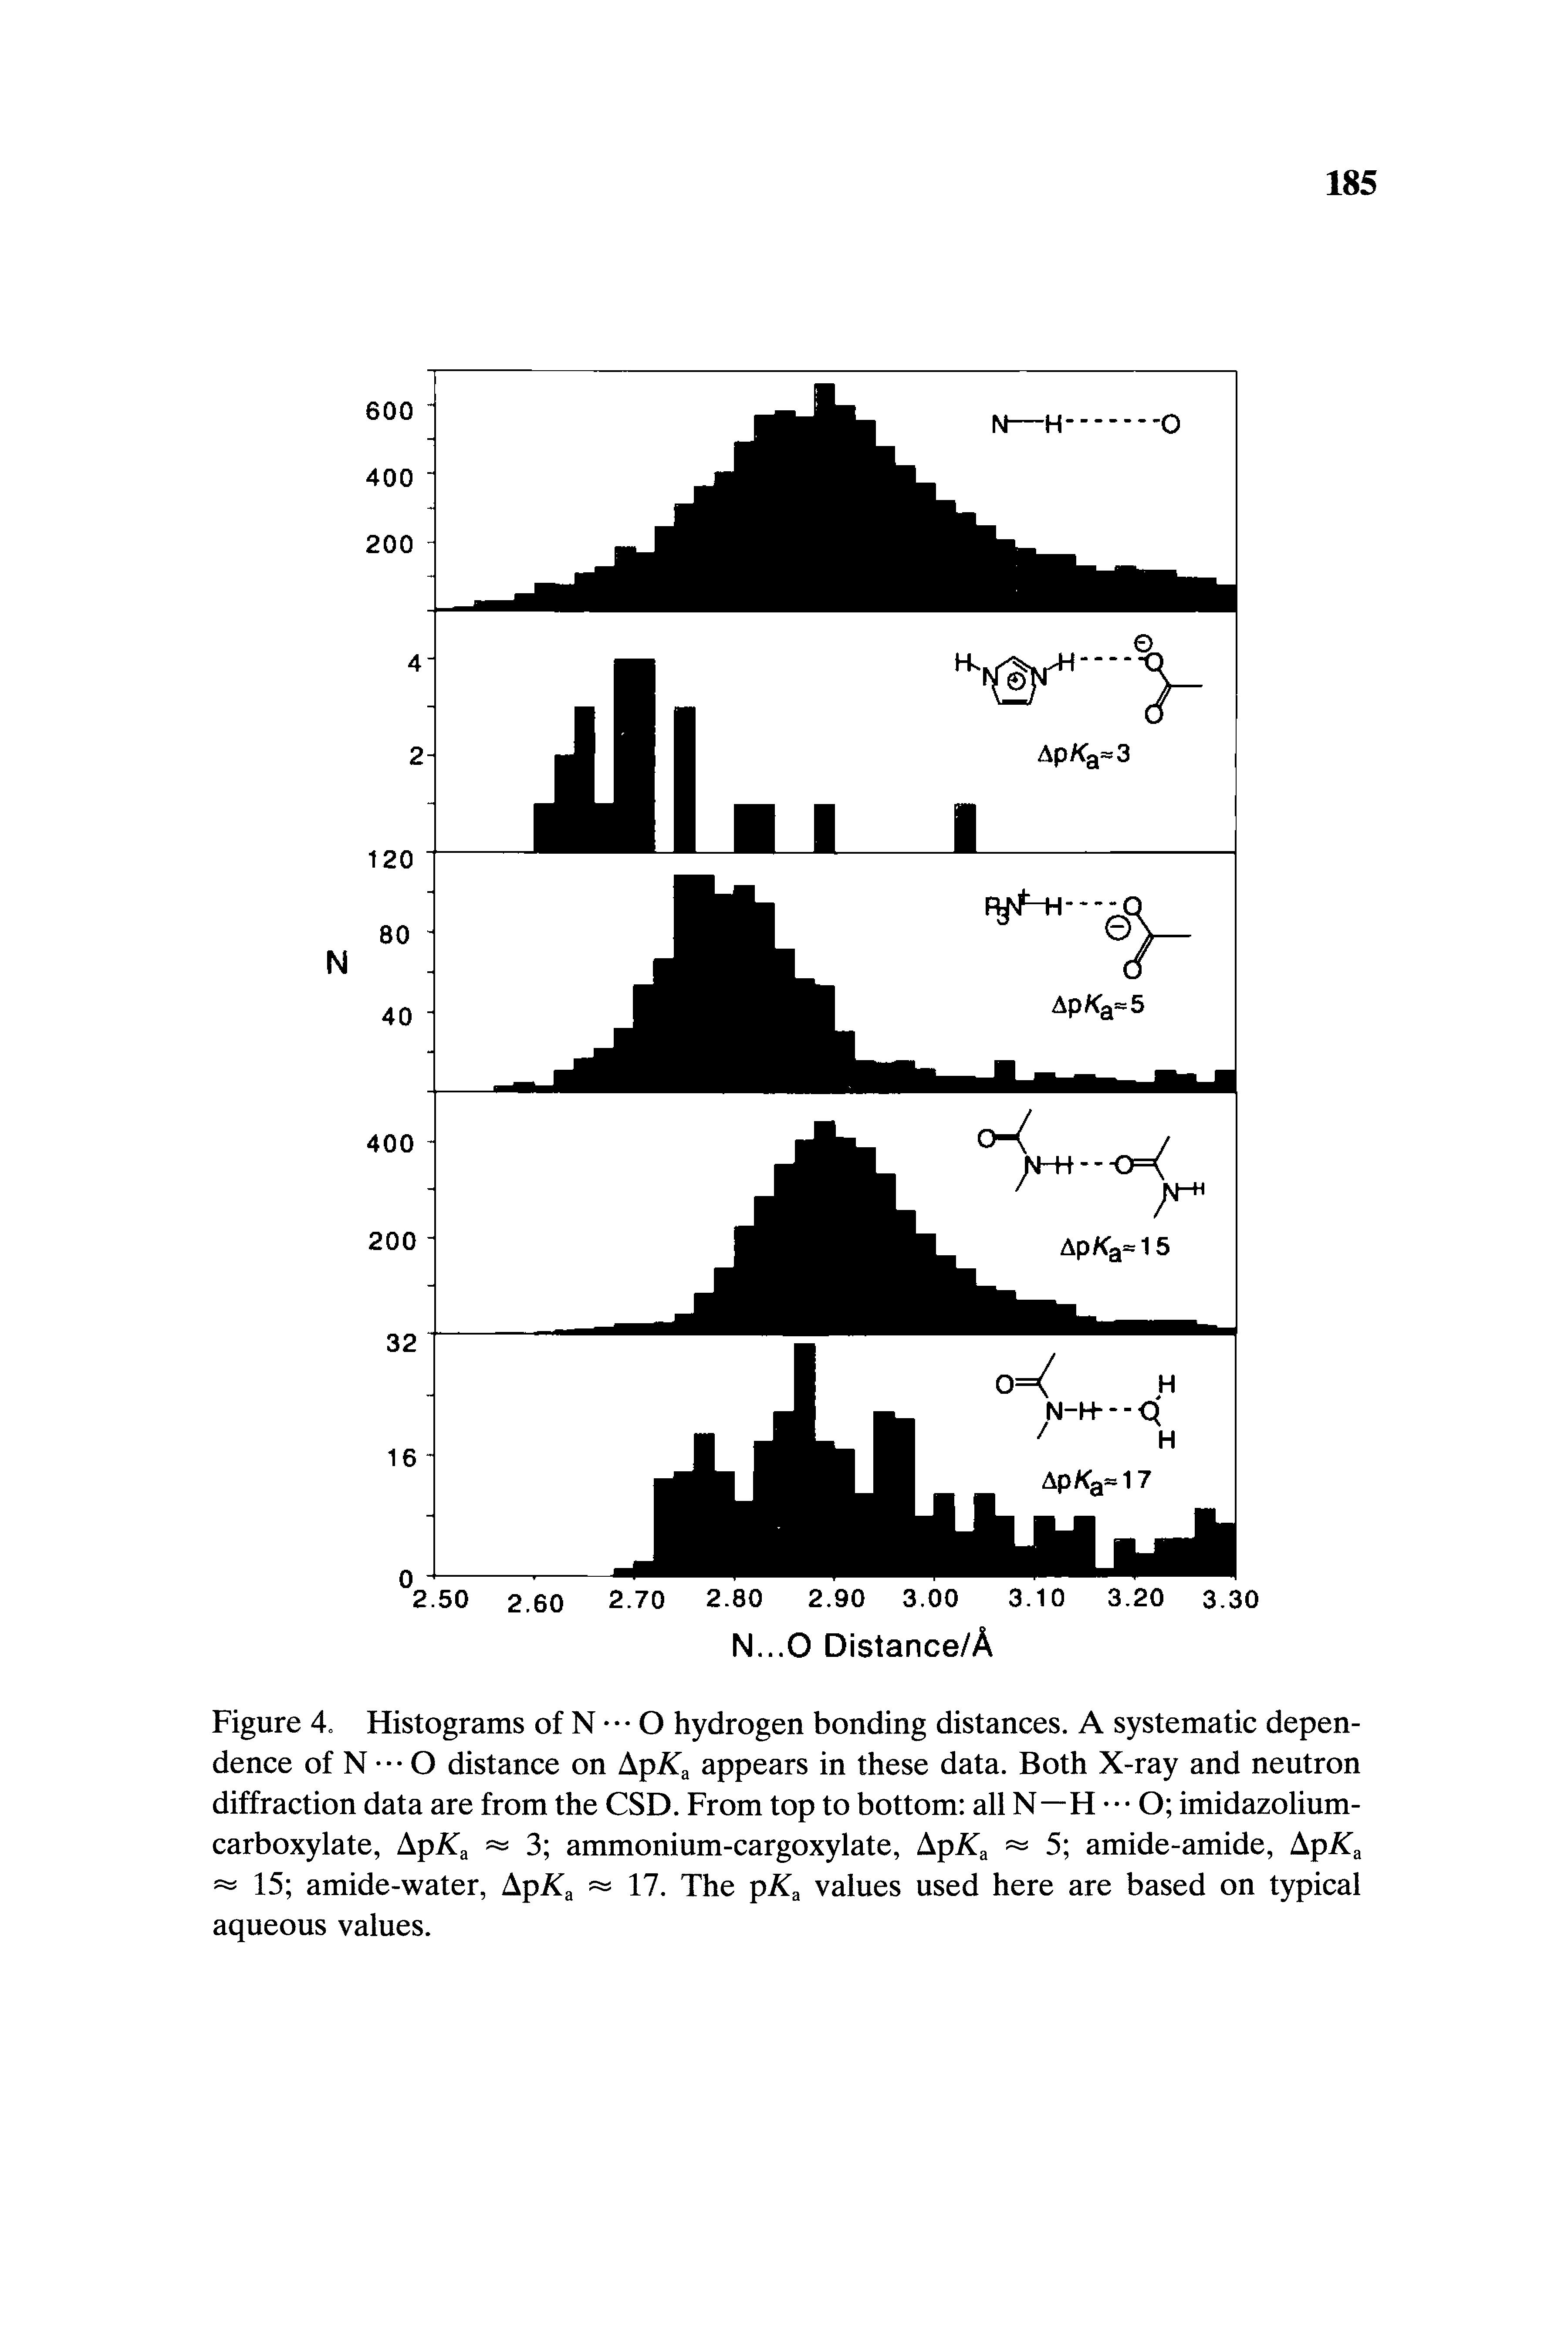 Figure 4 Histograms of N O hydrogen bonding distances. A systematic dependence of N O distance on ApXa appears in these data. Both X-ray and neutron diffraction data are from the CSD. From top to bottom all N—H O imidazolium-carboxylate, ApXa 3 ammonium-cargoxylate, ApXa 5 amide-amide, ApXa 15 amide-water, ApXa 17. The pXa values used here are based on typical aqueous values.